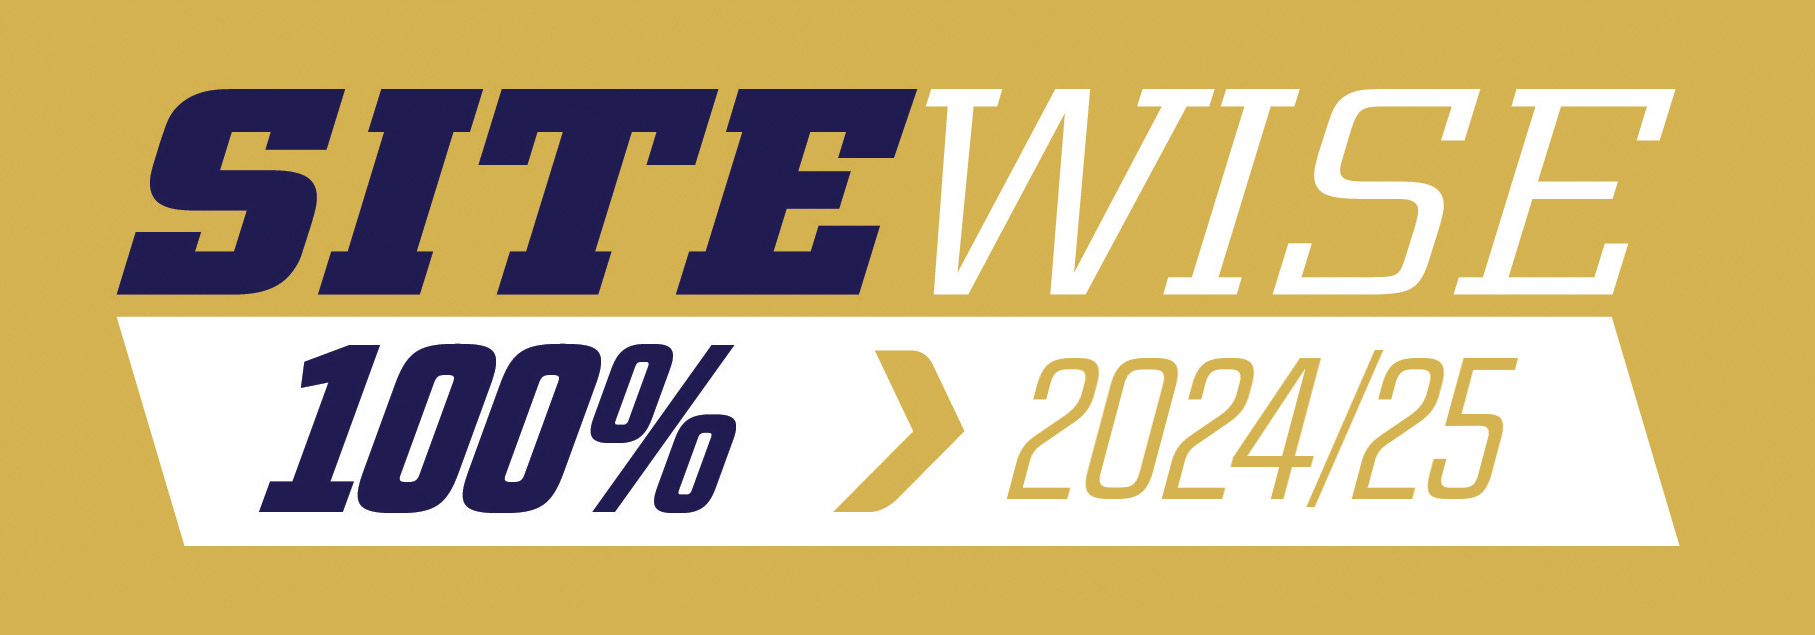 SiteWise 100% > 2024/25